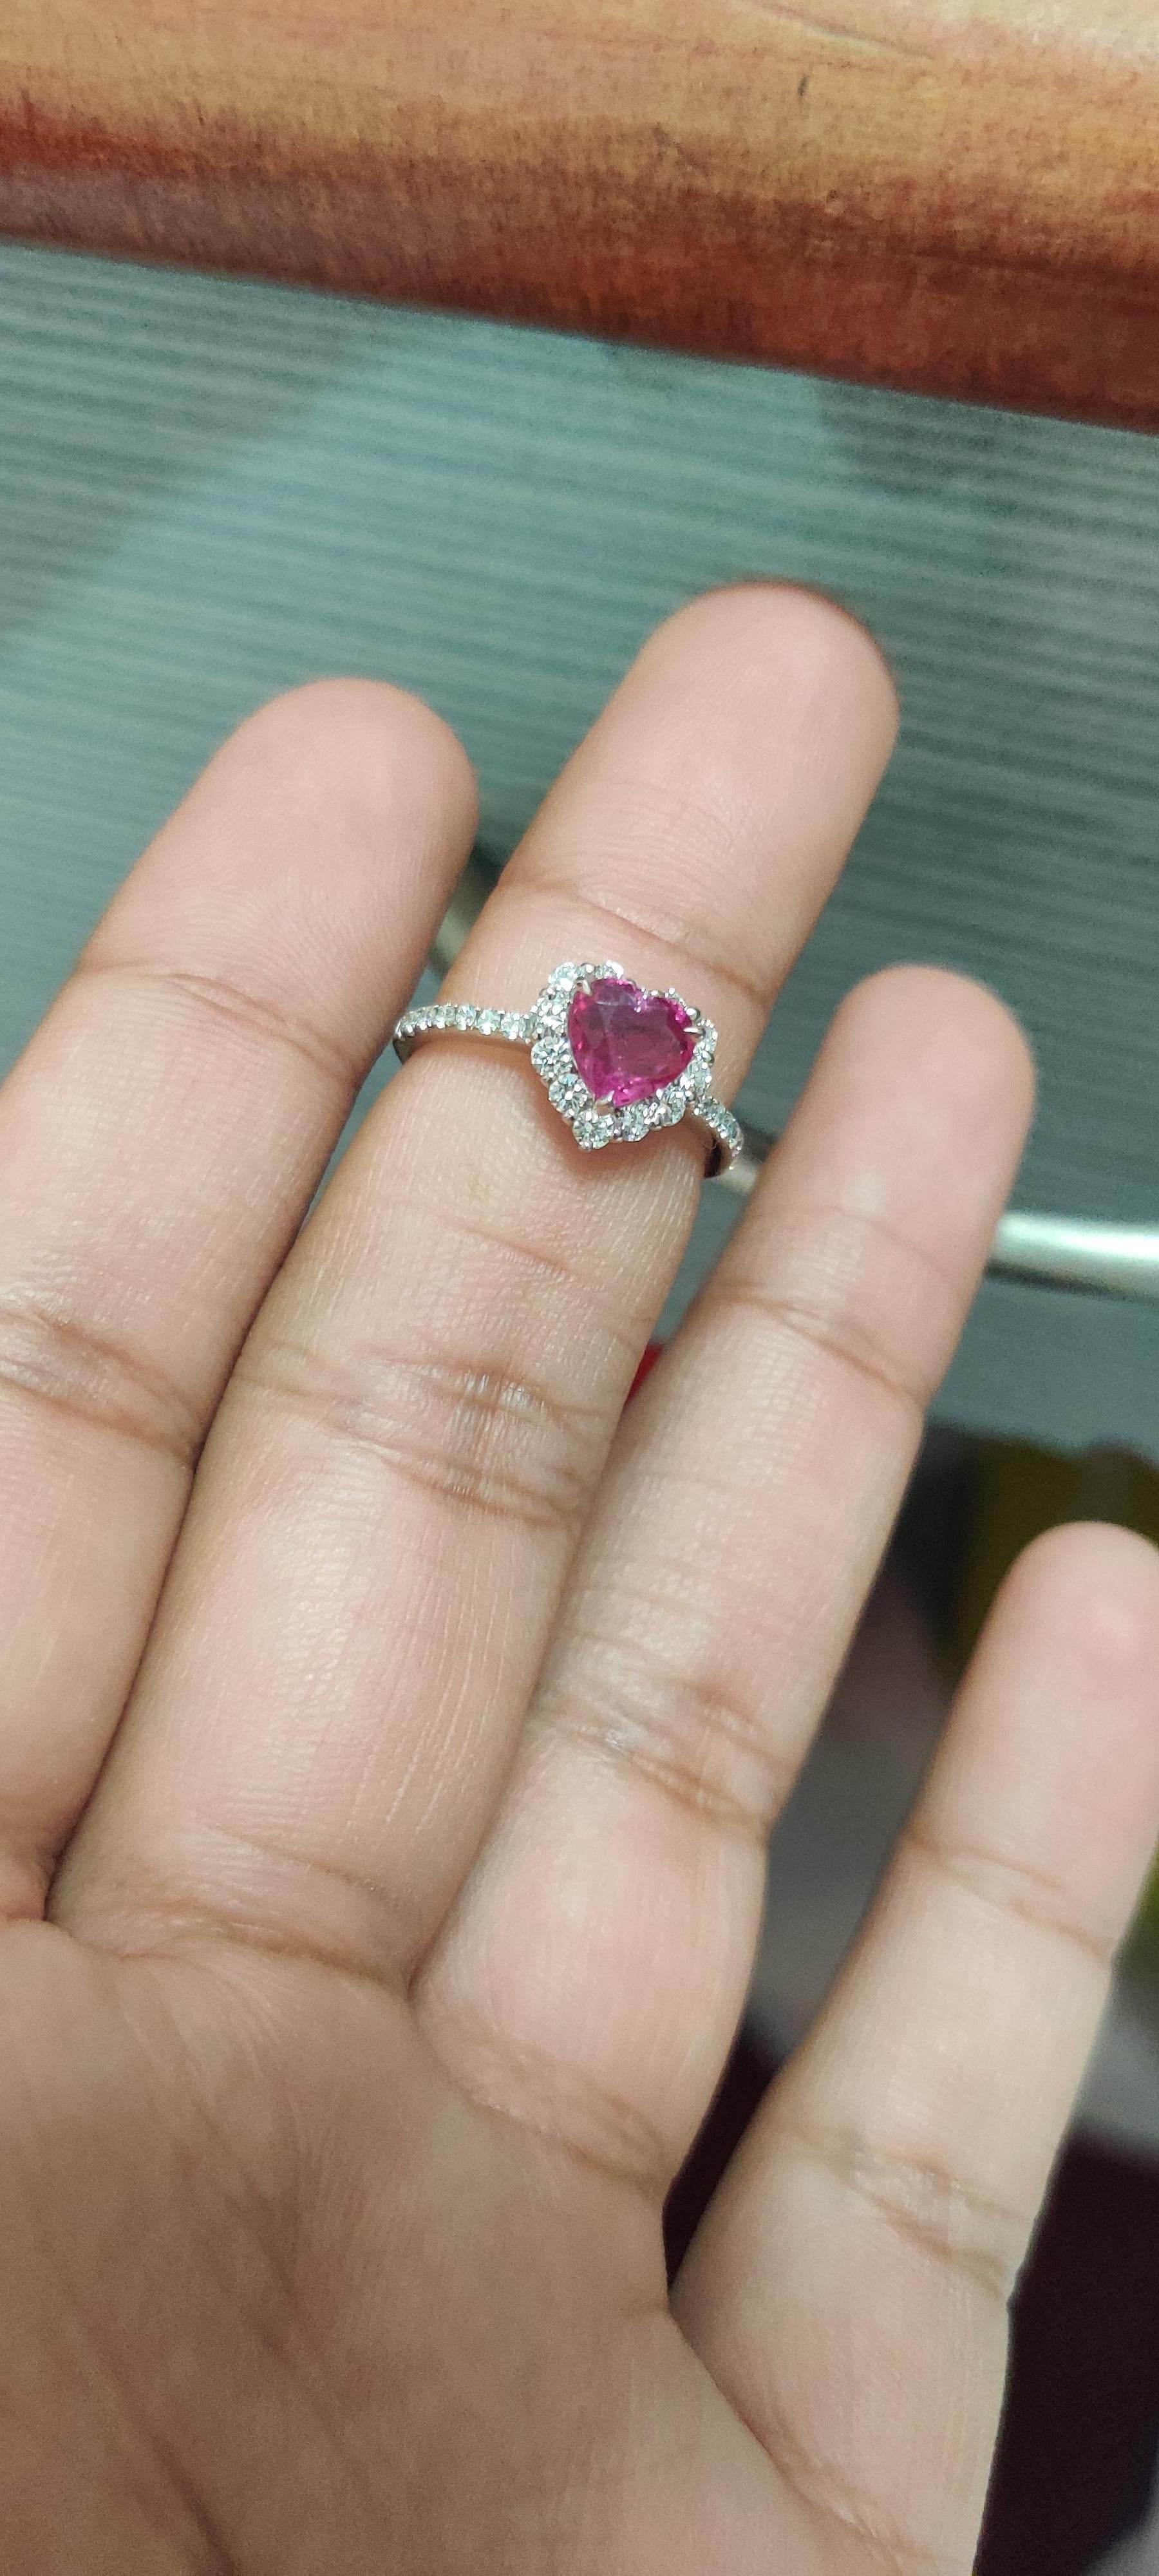 1.23 Carat Heart Shaped Ruby Ring in Platinum 900 For Sale 1